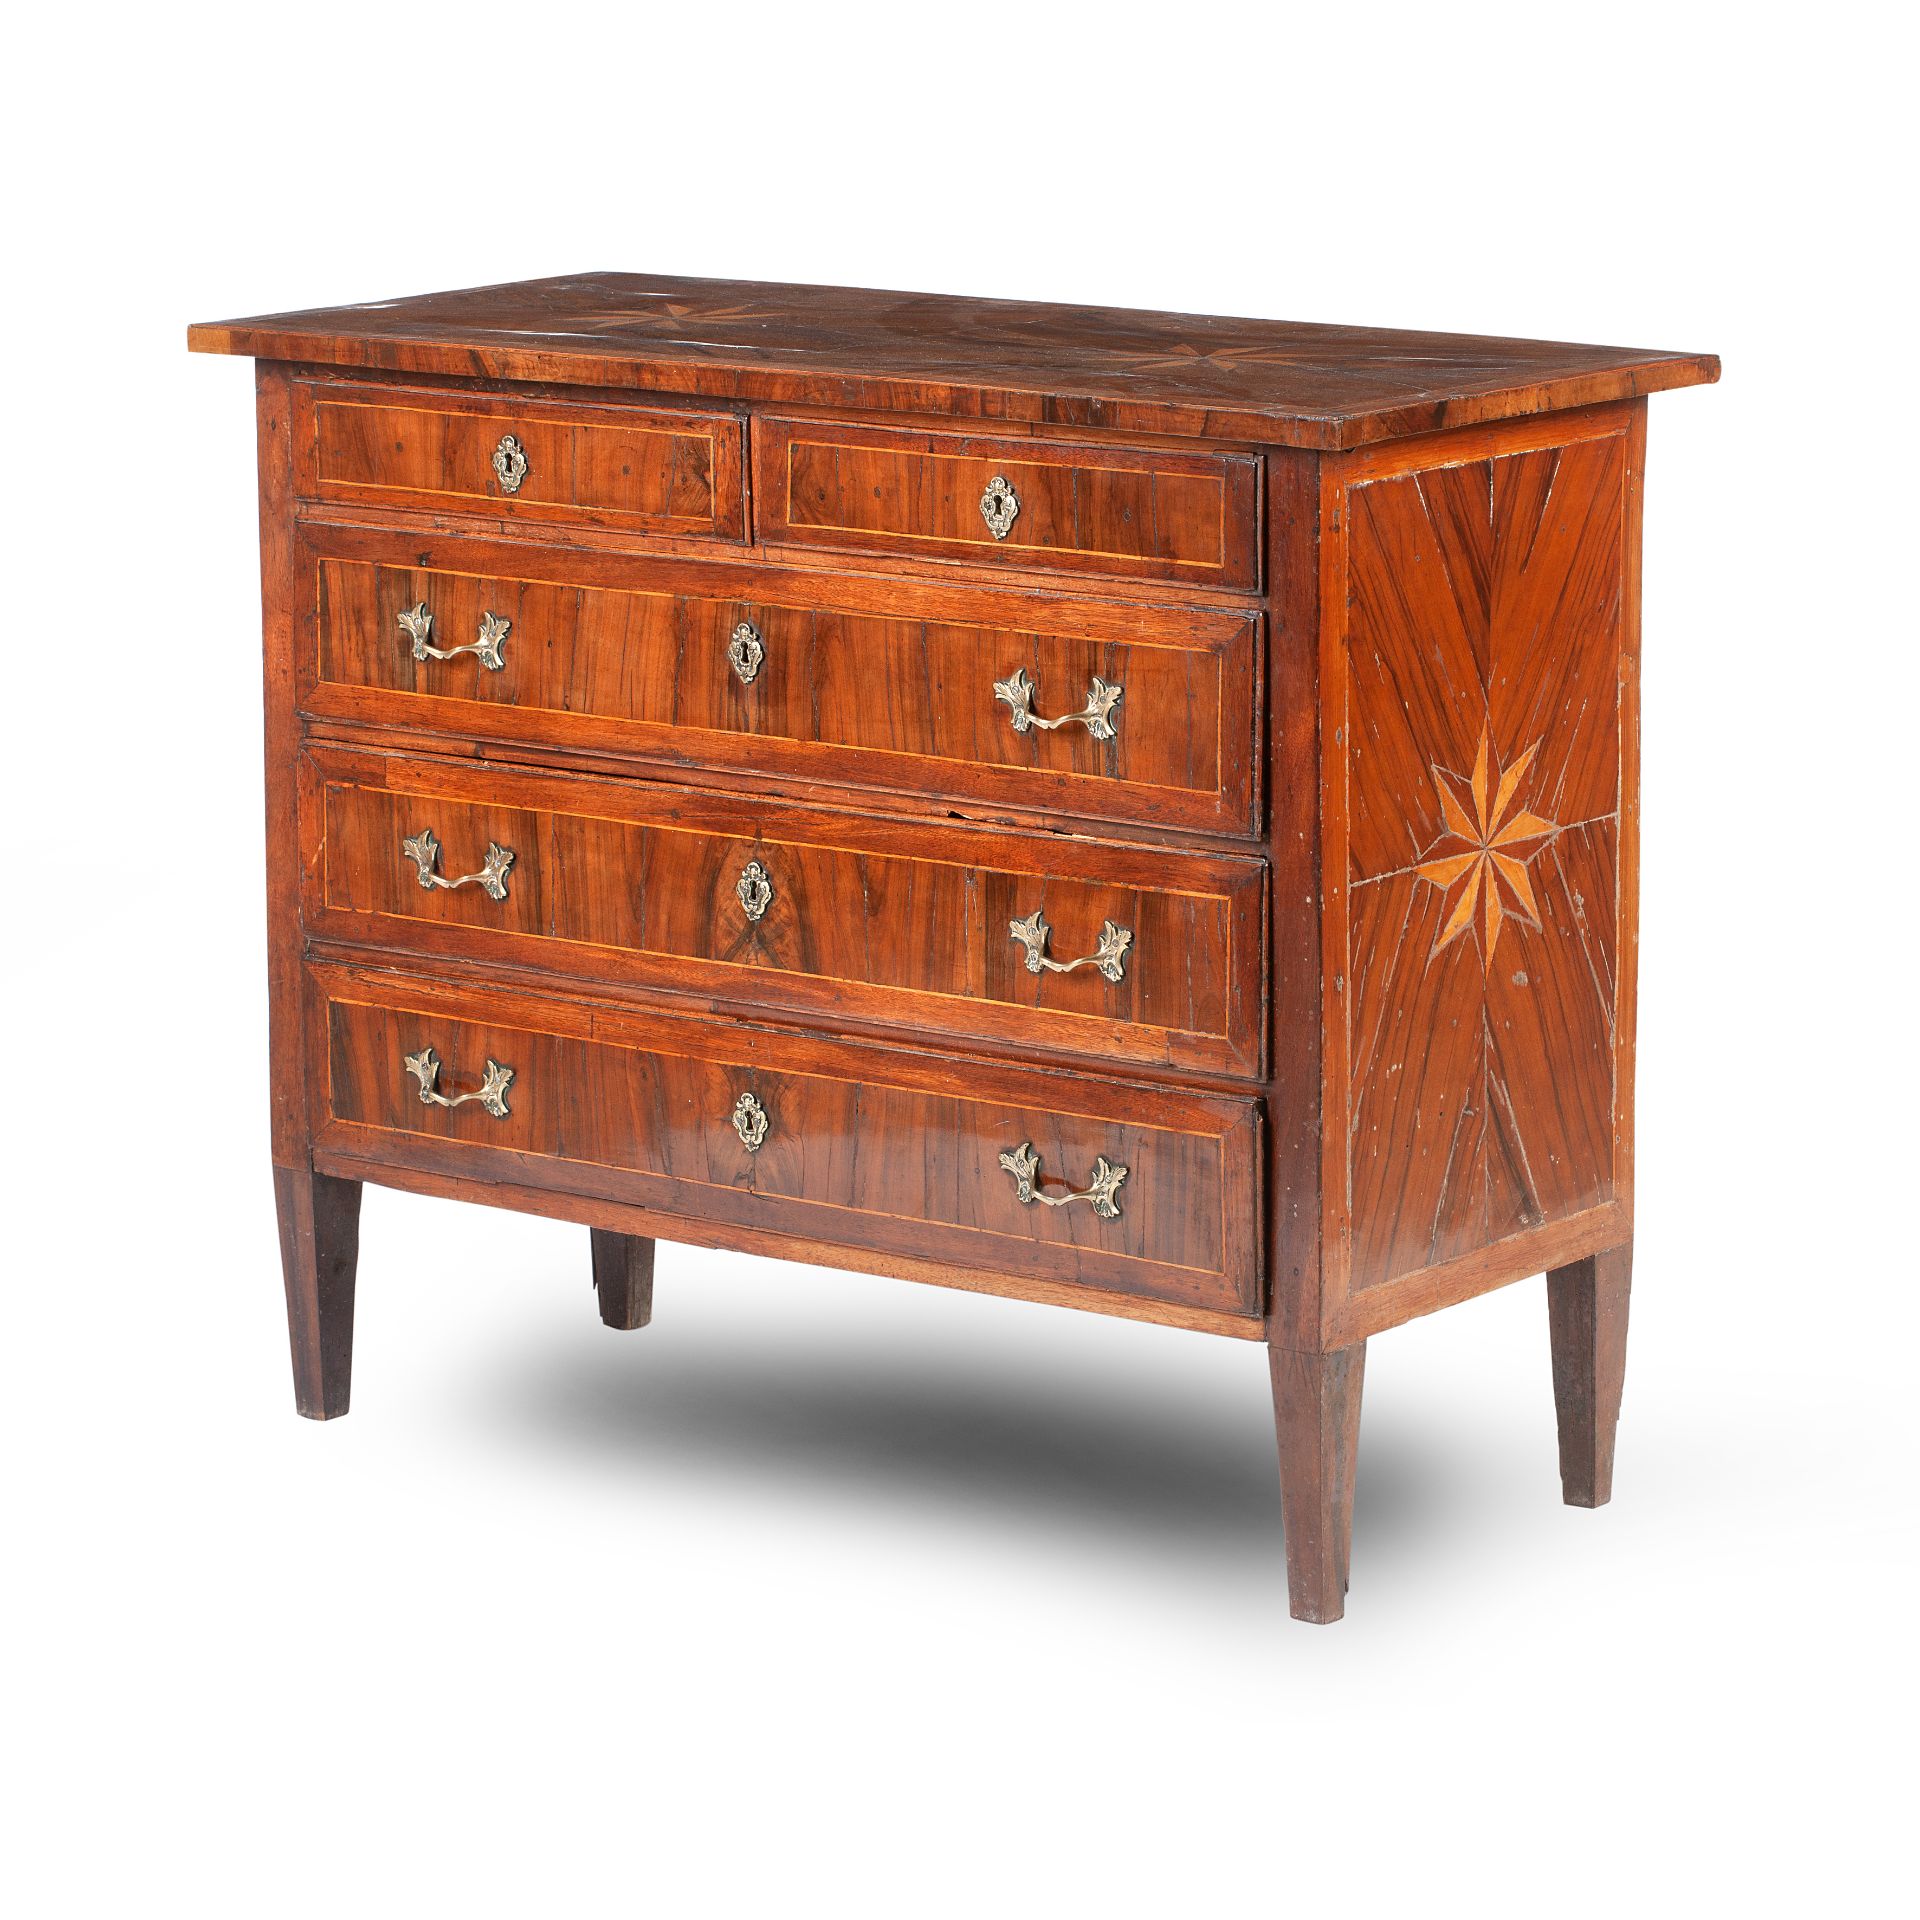 A late 18th/19th century Maltese fruitwood and walnut marquetry commode